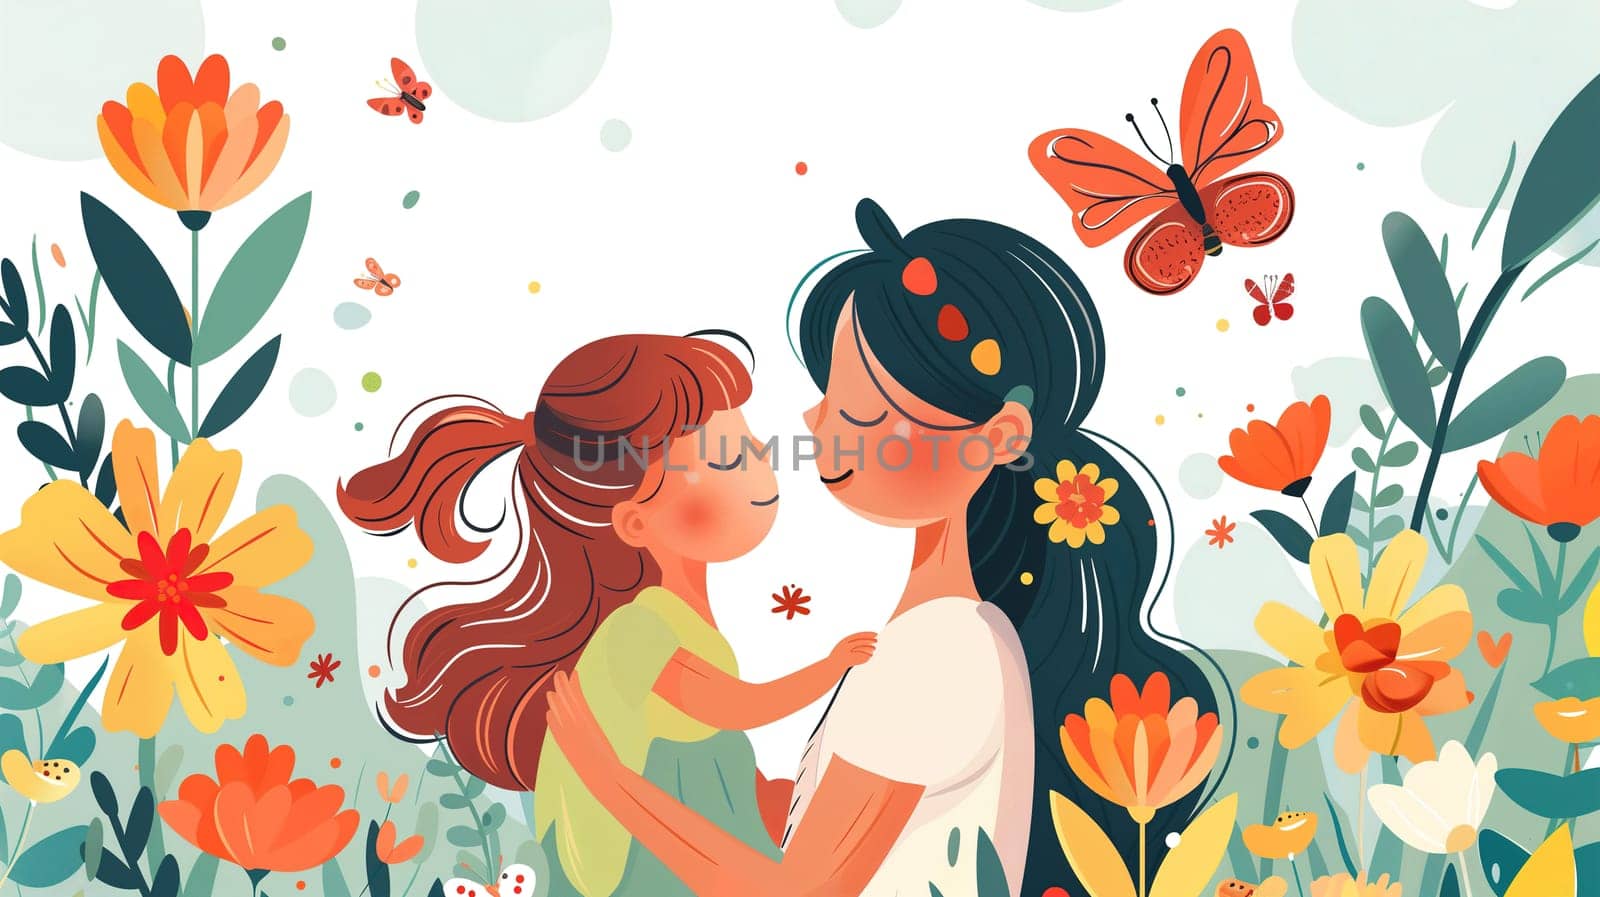 A mother embraces her daughter lovingly amidst a field of colorful flowers. The mothers arms are wrapped around her daughter, expressing affection and warmth in a natural setting.